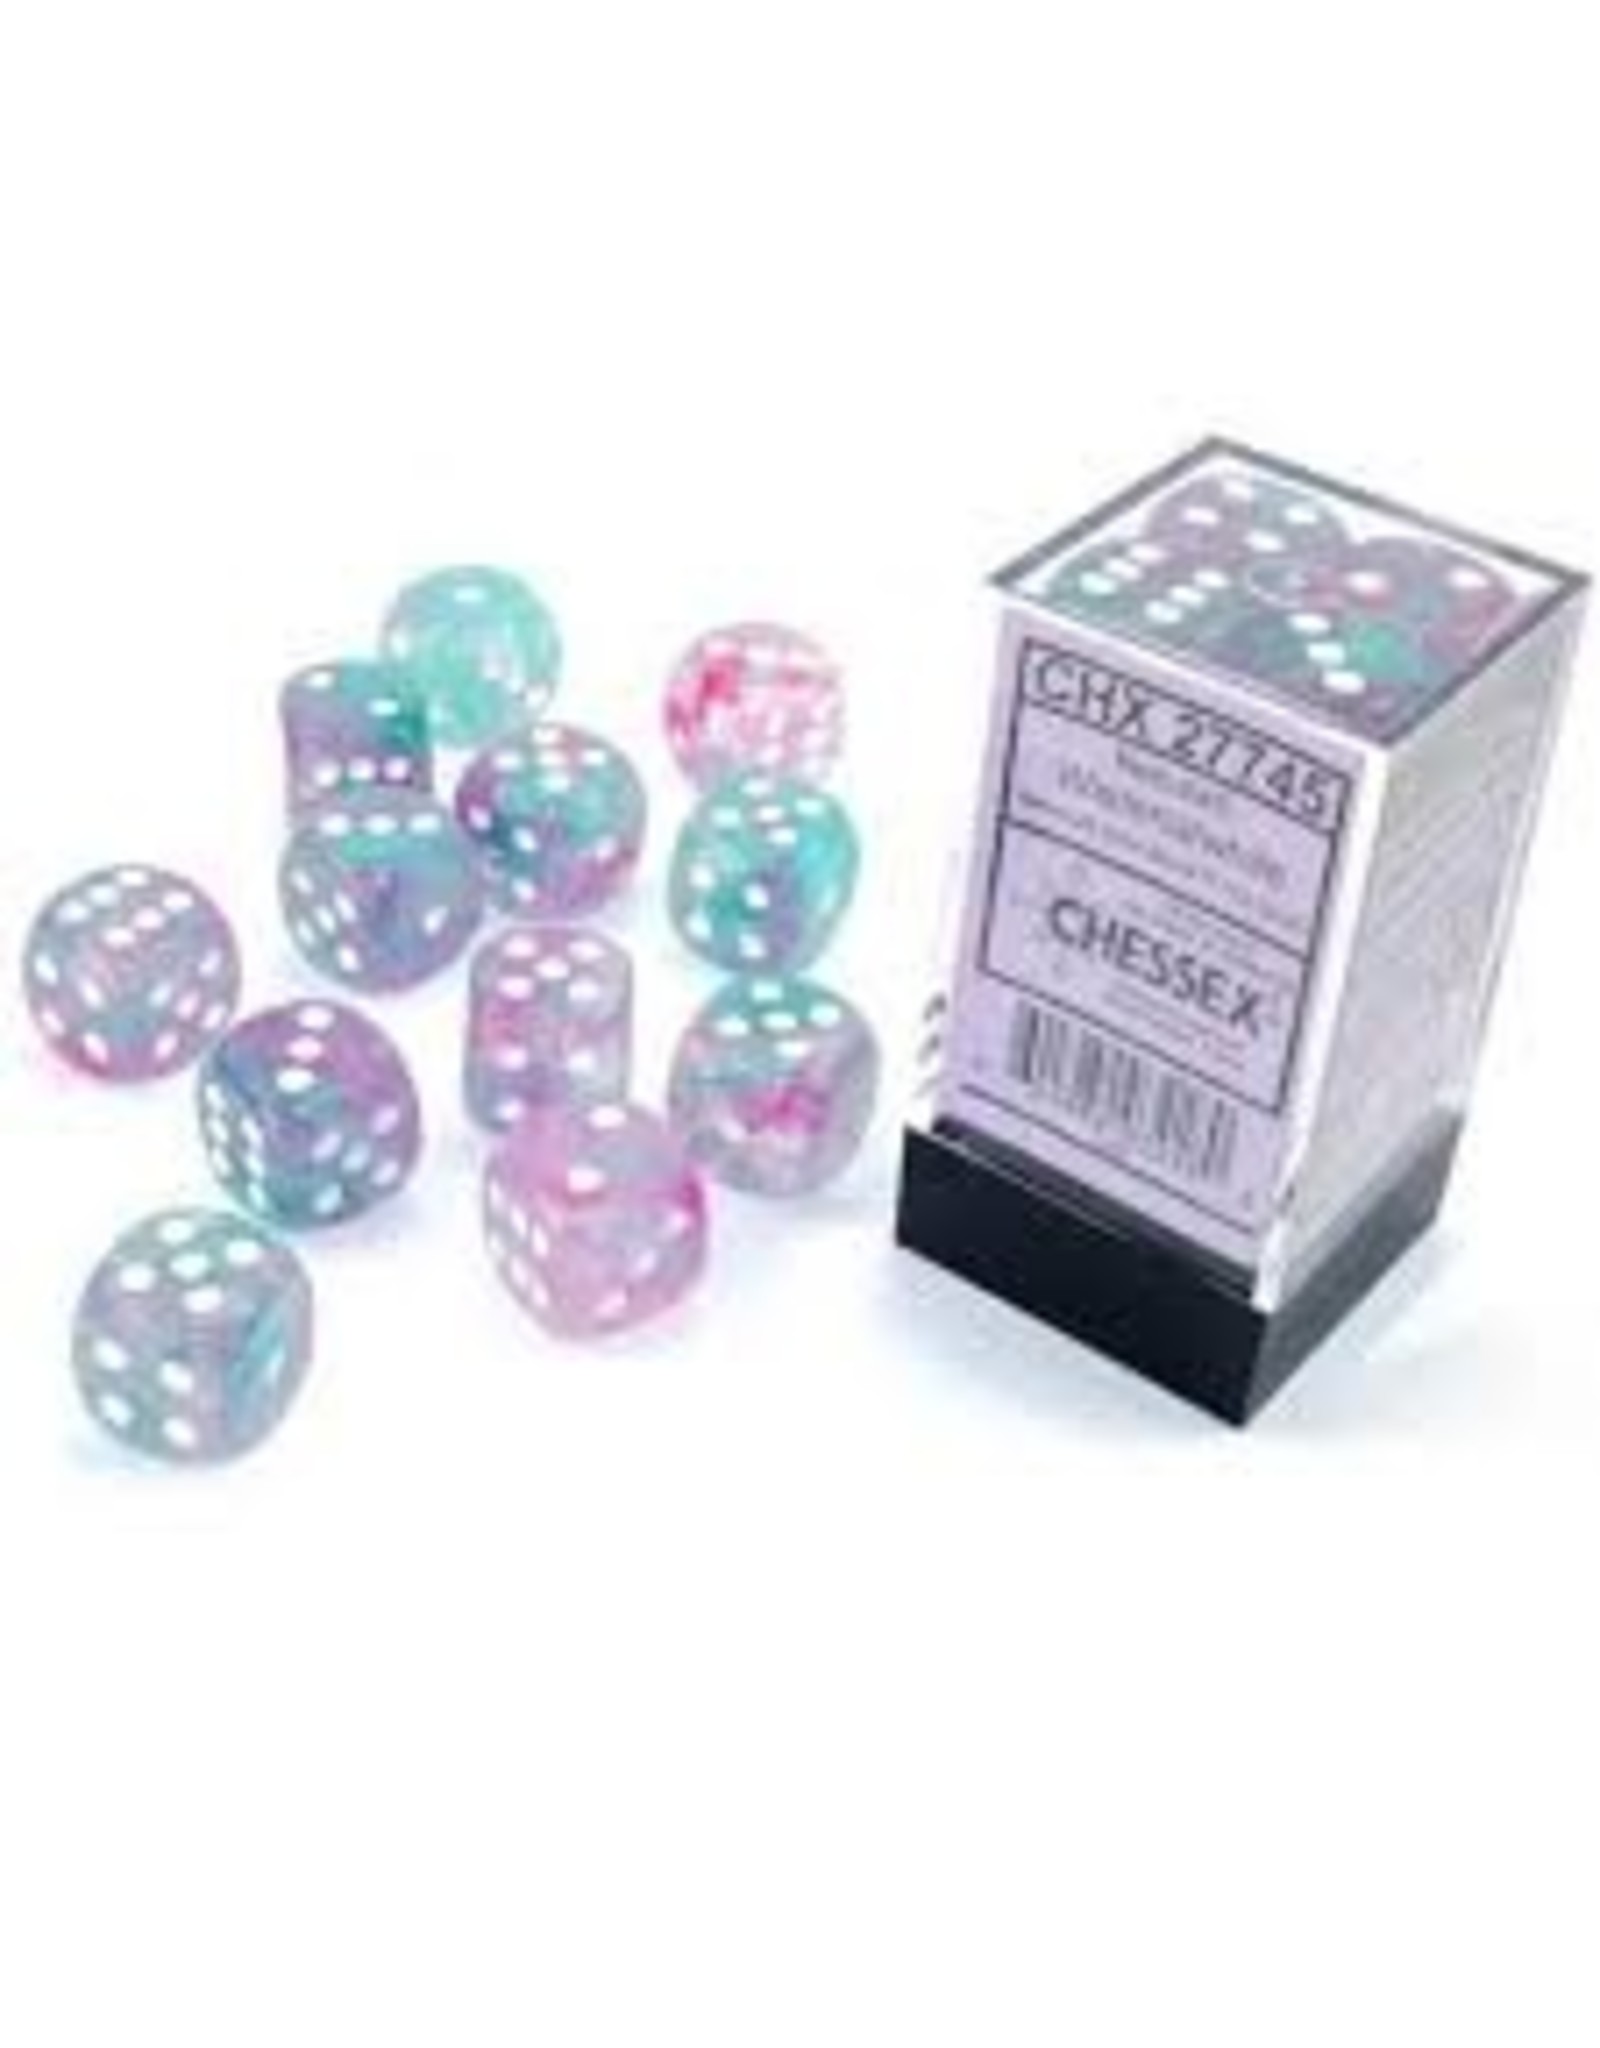 Chessex d6Cube 16mm Luminary NB Wisteria with White (12)